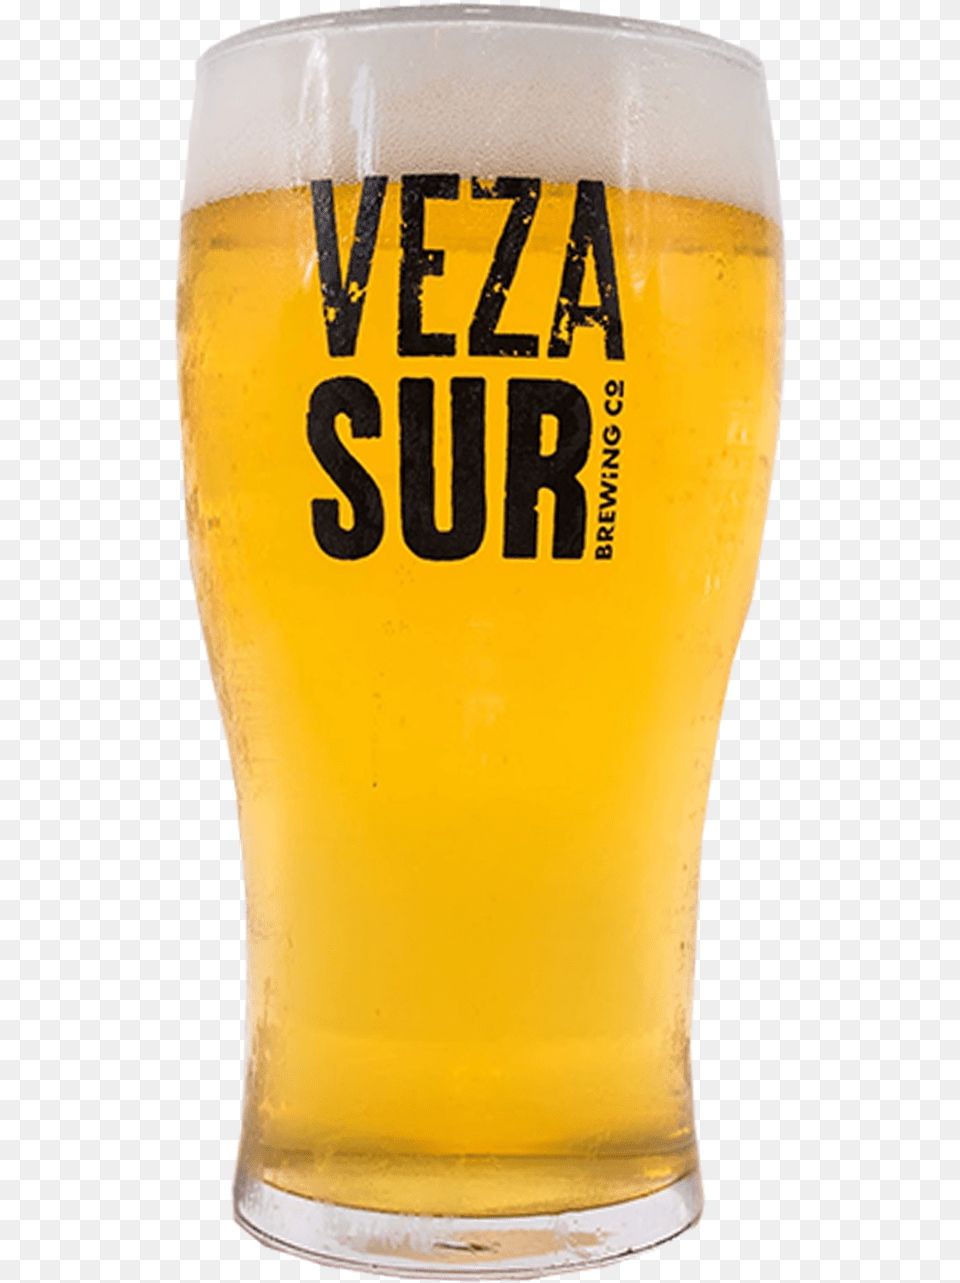 Veza Sur Sessions Ipa, Alcohol, Beer, Beer Glass, Beverage Png Image